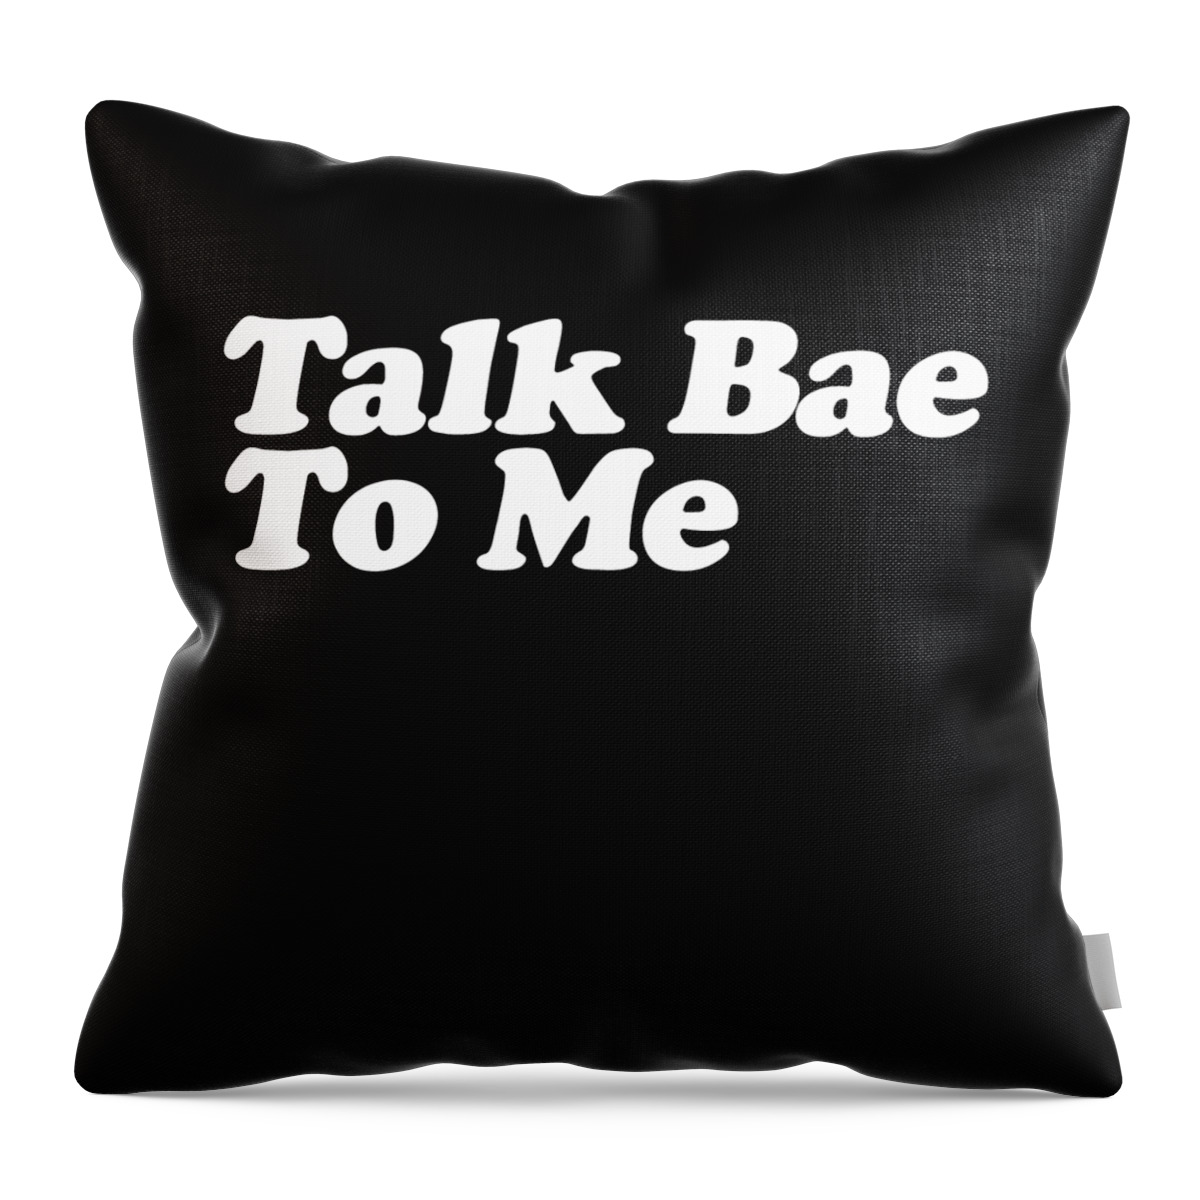 Funny Throw Pillow featuring the digital art Talk Bae To Me by Flippin Sweet Gear